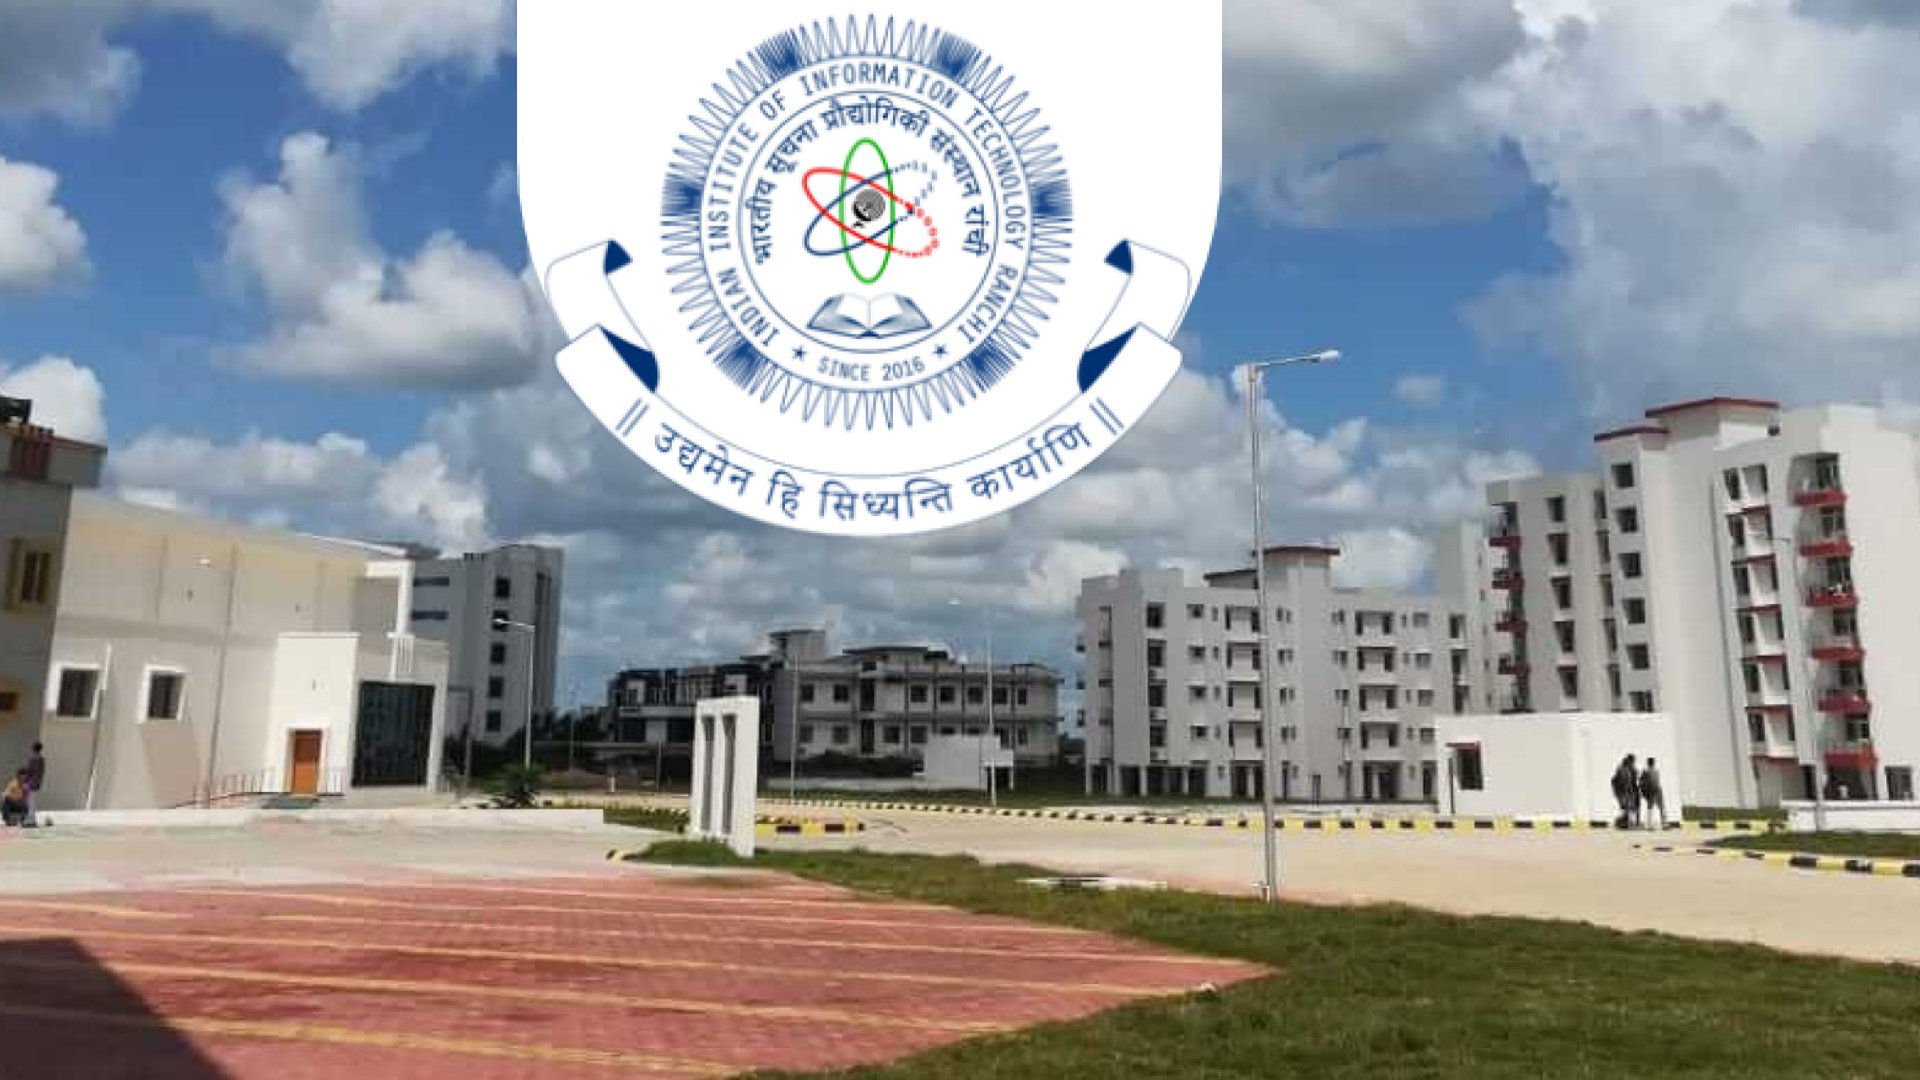 Ad-hoc Faculty Position (Walk-in-interview) in IIIT Ranchi, India